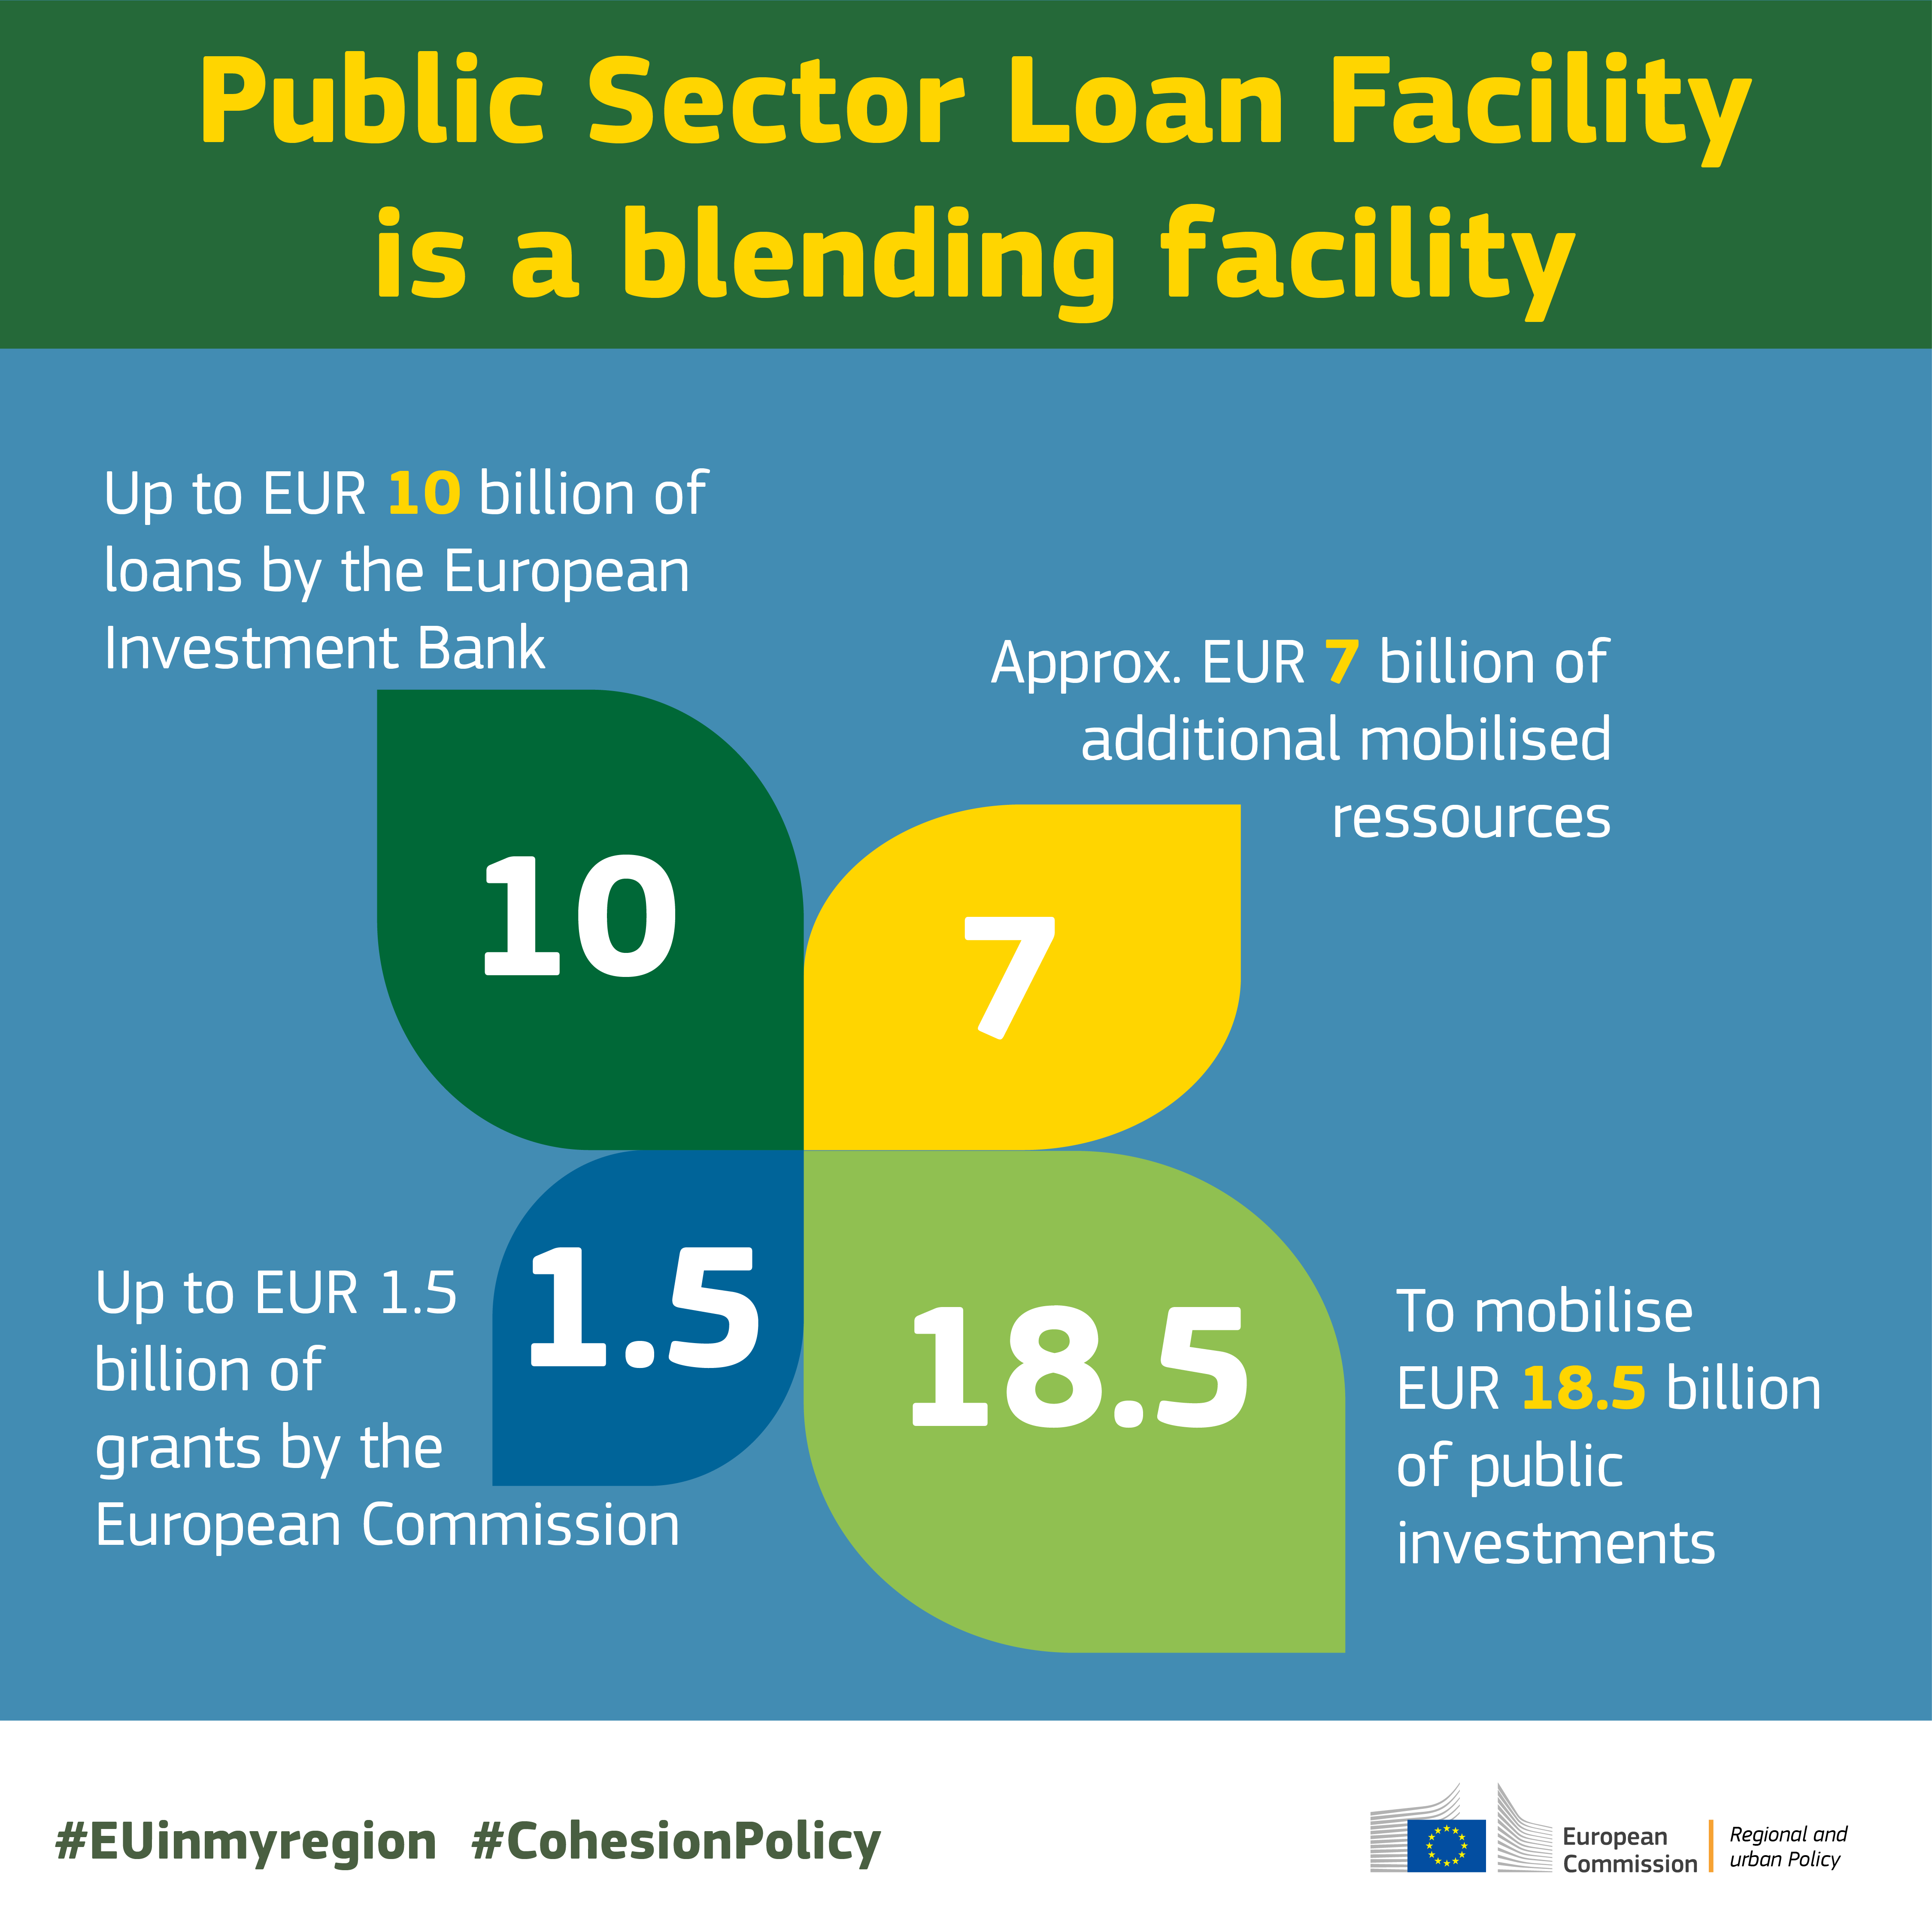 Just transition: learn more about how the Public Sector Loan Facility supports just transition by blending grants and loans